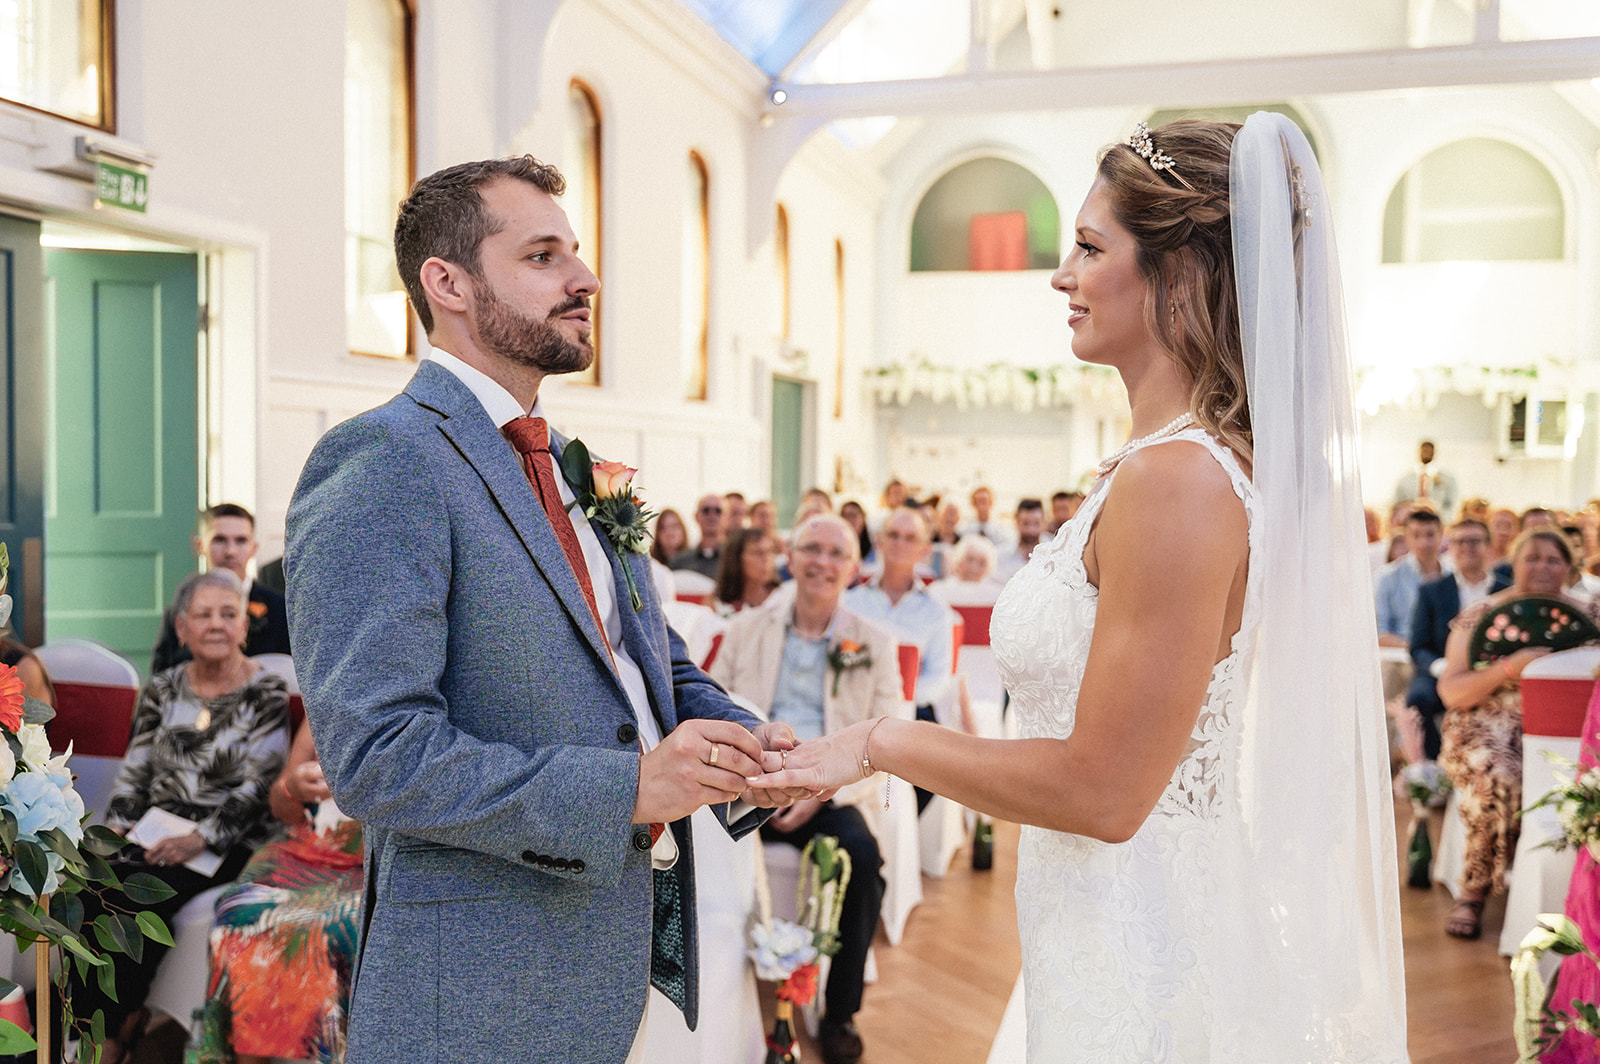 Natalie and George's ring exchange during the wedding ceremony at Ashburton Hall